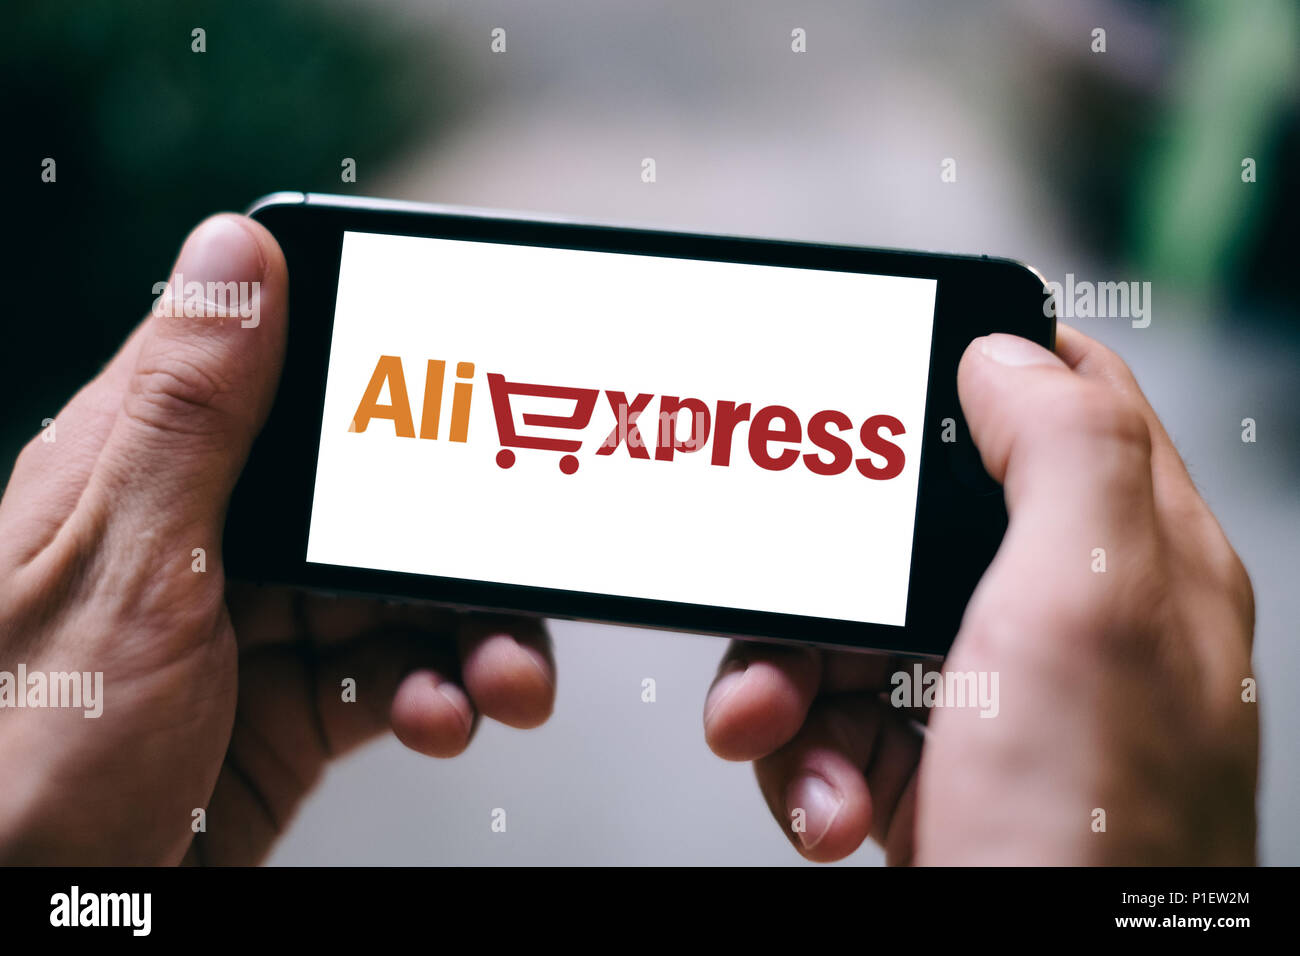 Closeup of iPhone Screen with ALIEXPRESS APP LOGO or ICON Stock Photo